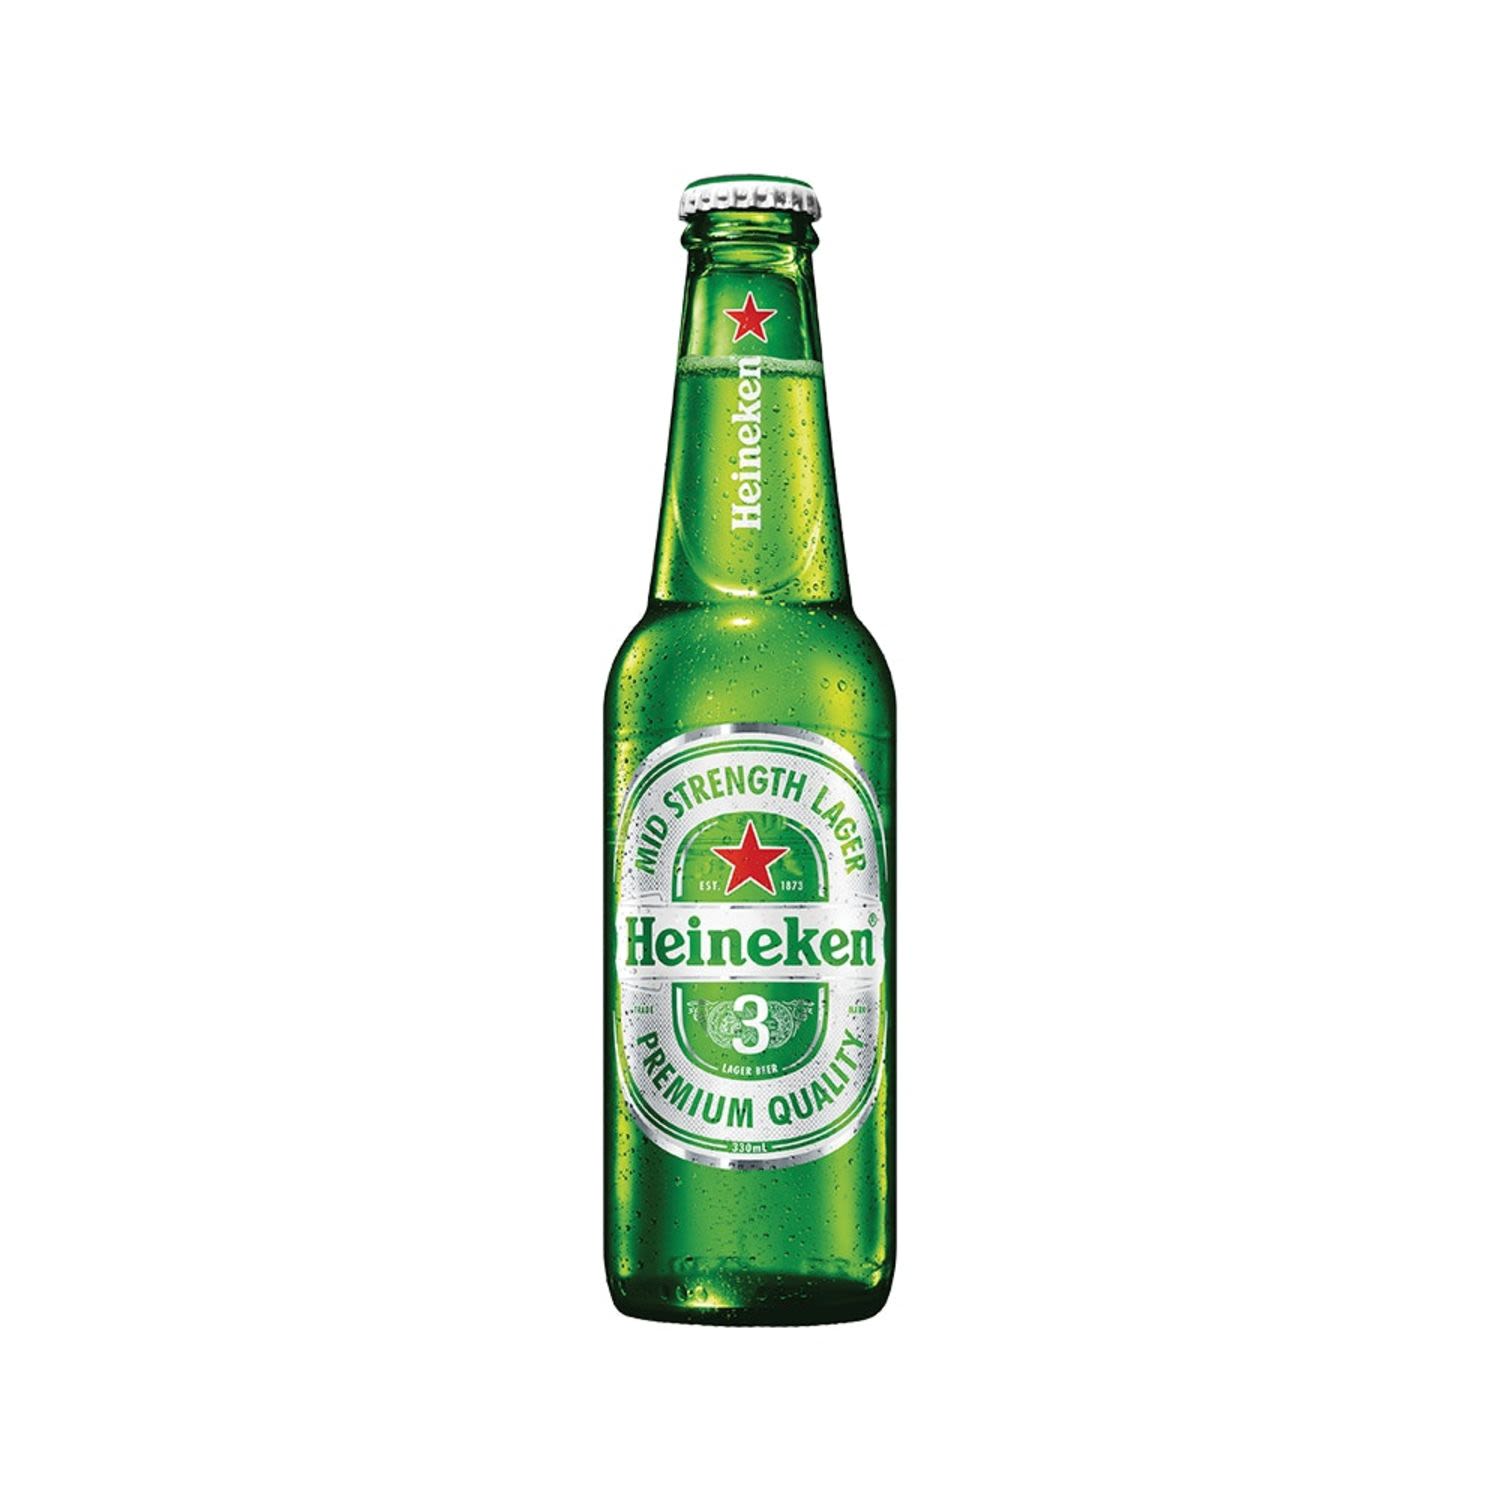 An easy drinking beer, at 3.3% ABV with lower calories & carbohydrates, with a hint of citrus for a more refreshing beer with a great taste<br /> <br />Alcohol Volume: 3.30%<br /><br />Pack Format: Bottle<br /><br />Standard Drinks: 0.9</br /><br />Pack Type: Bottle<br /><br />Country of Origin: Netherlands<br />